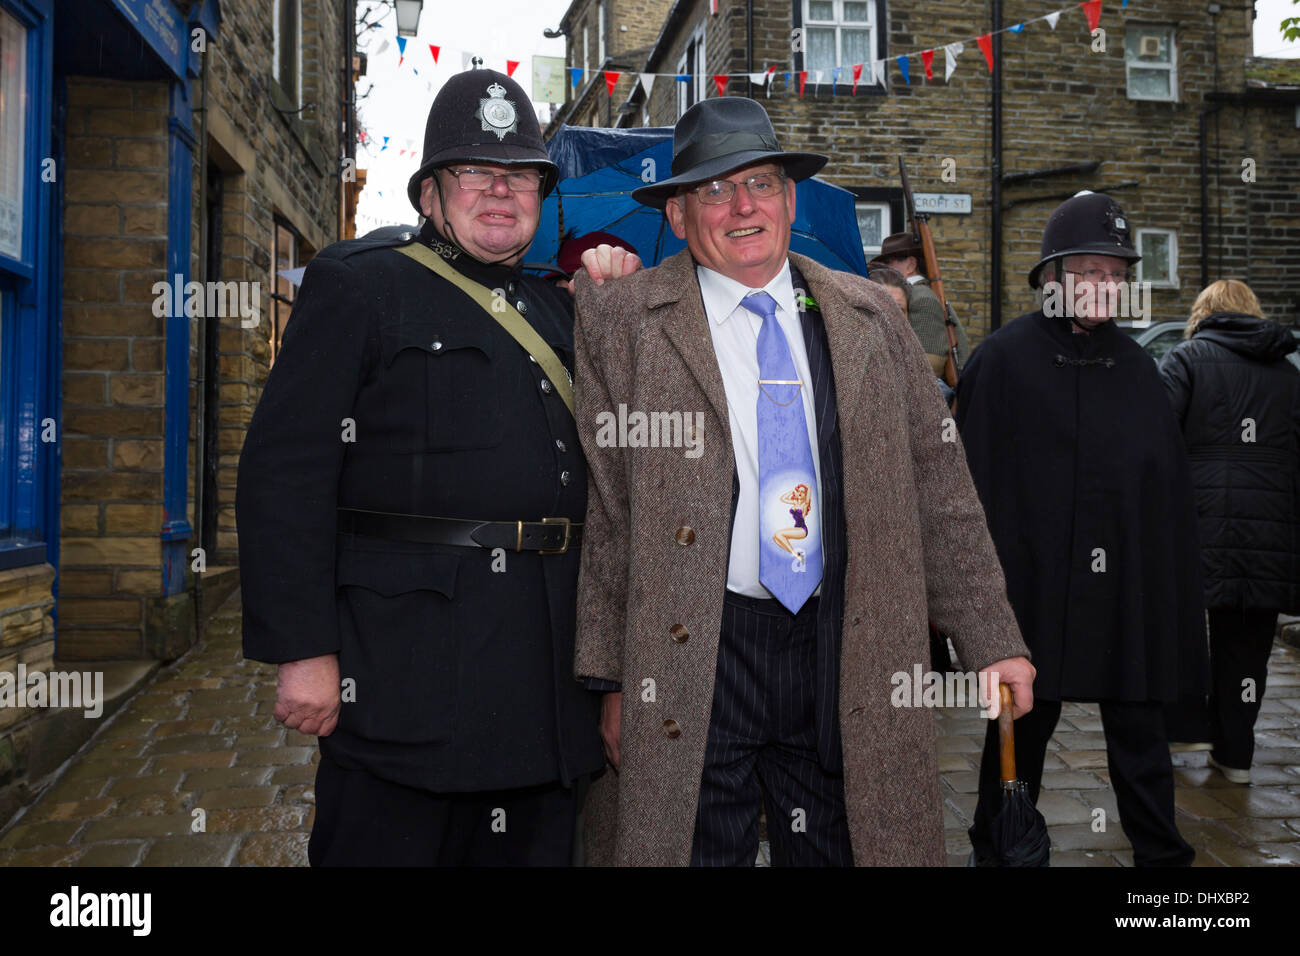 A Police officer apprehends a spiv at Haworth 1940s weekend, May 2013. Stock Photo